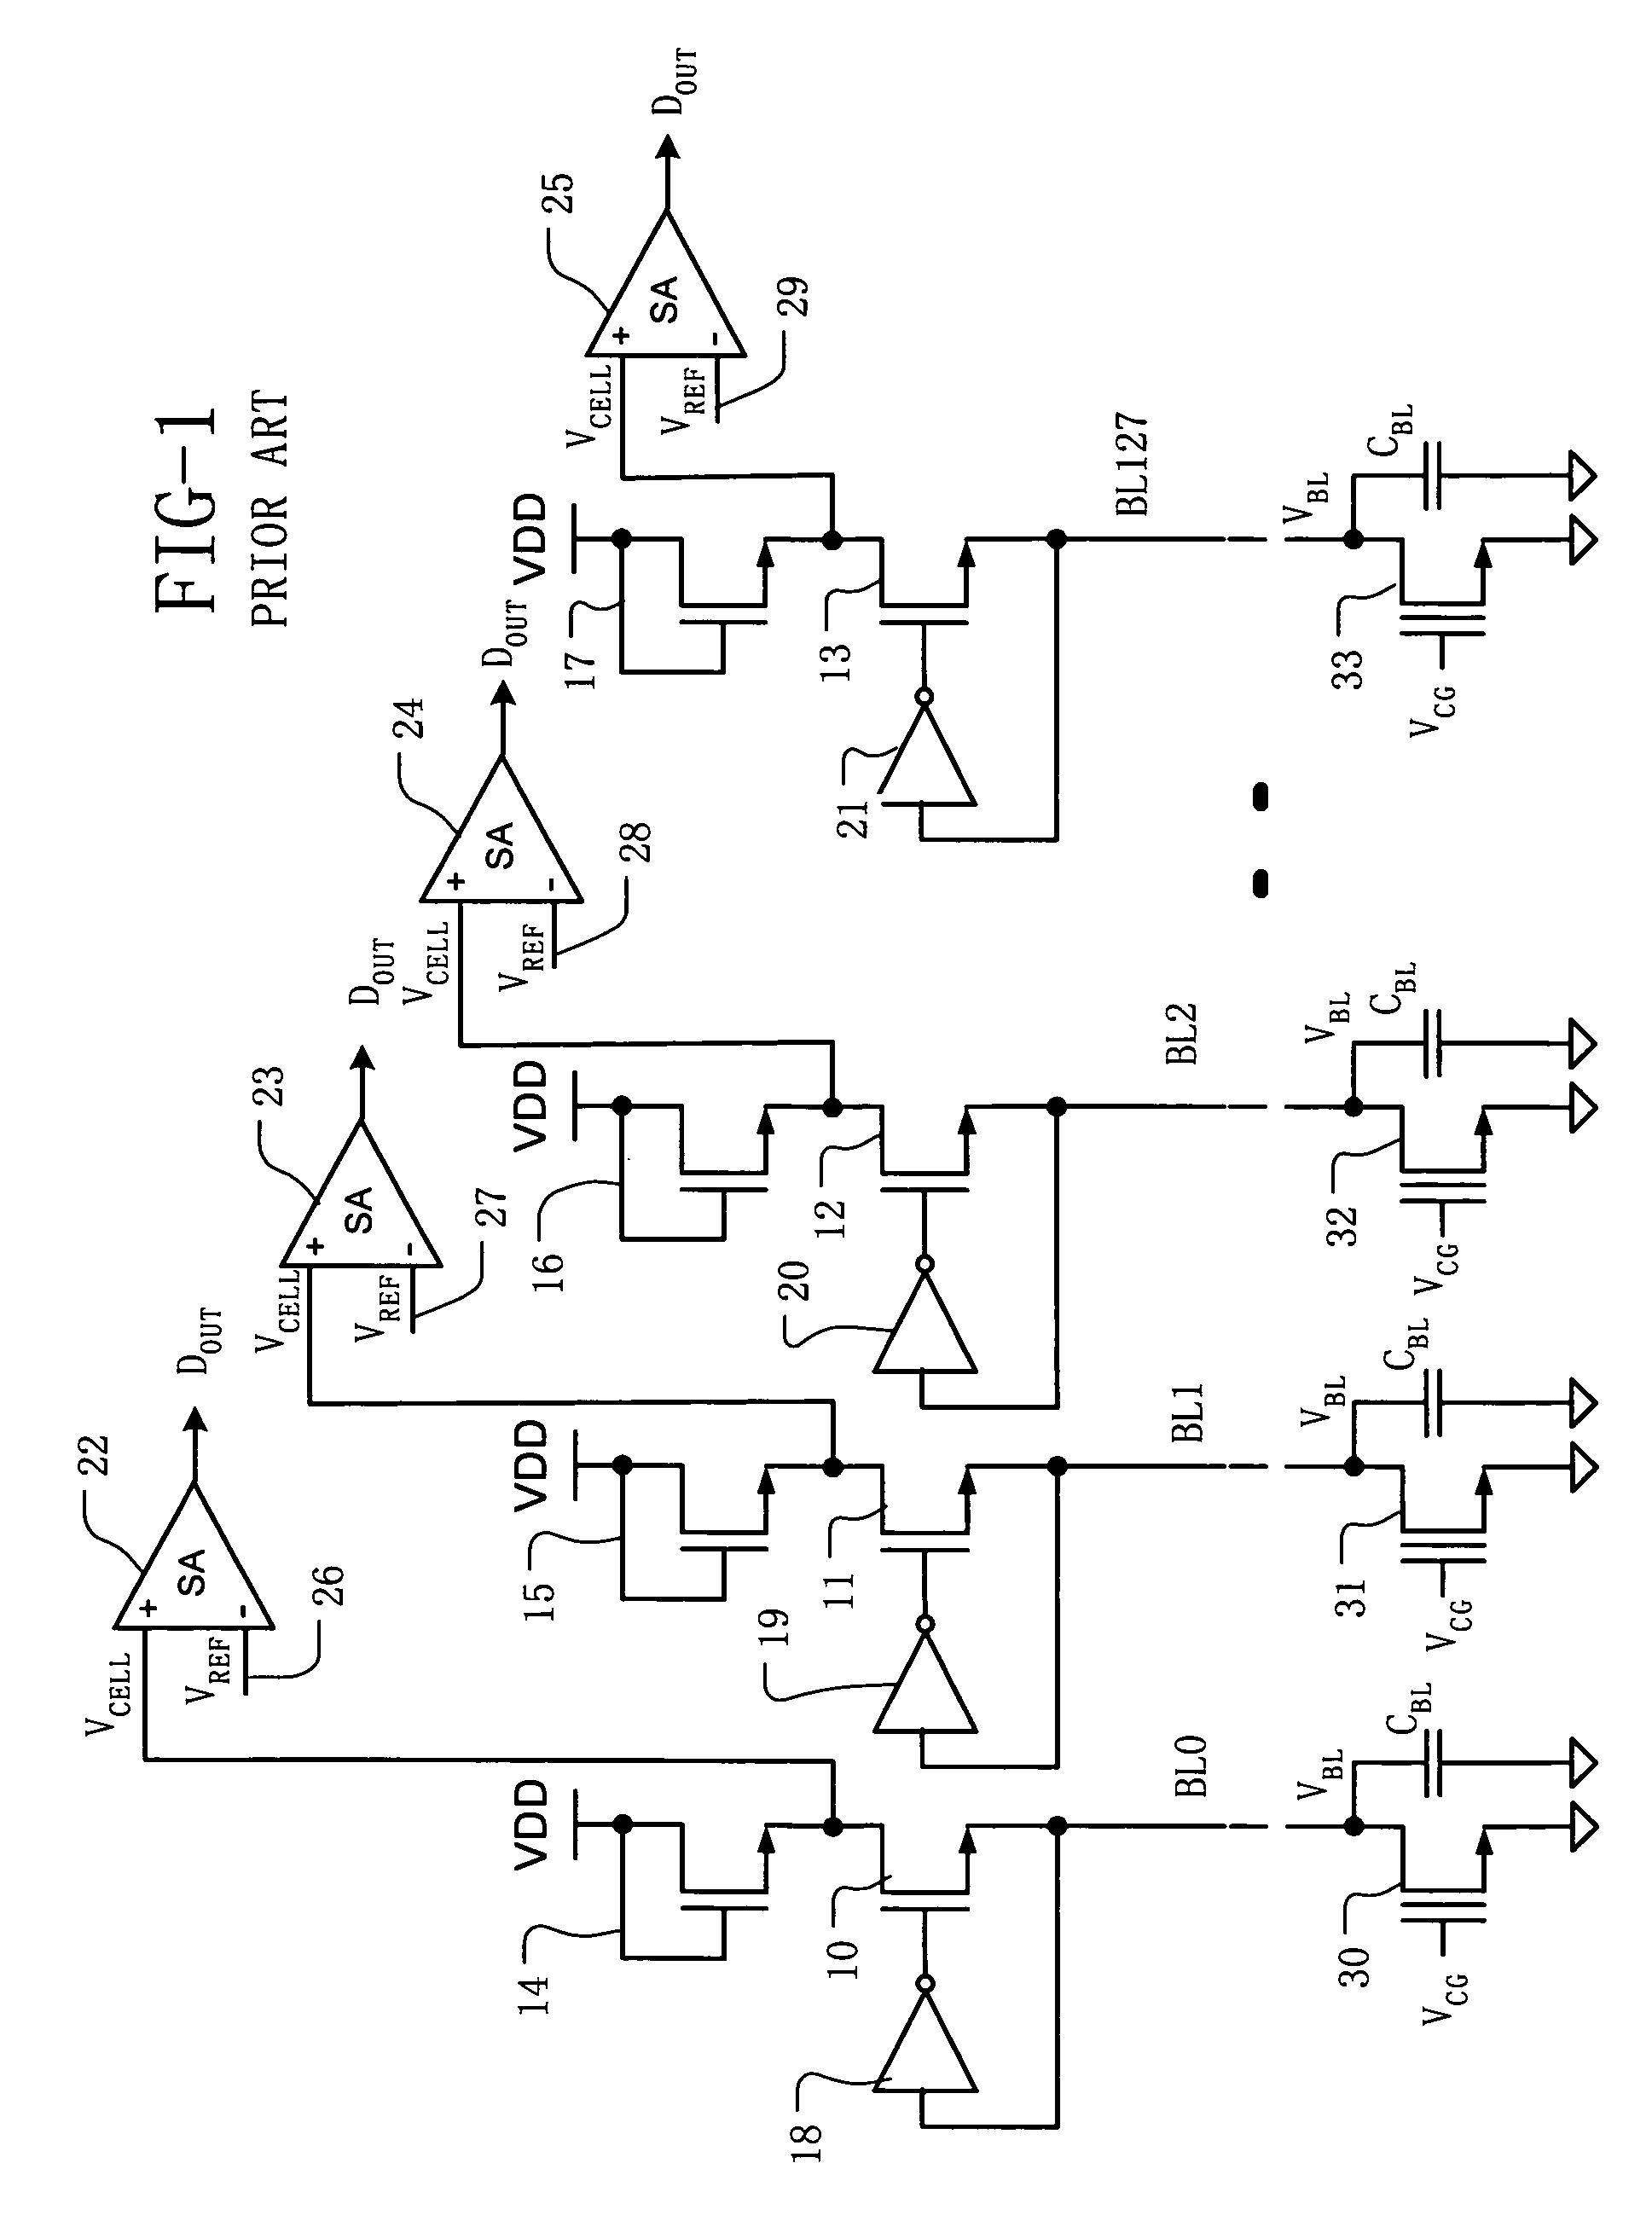 Memory array with low power bit line precharge